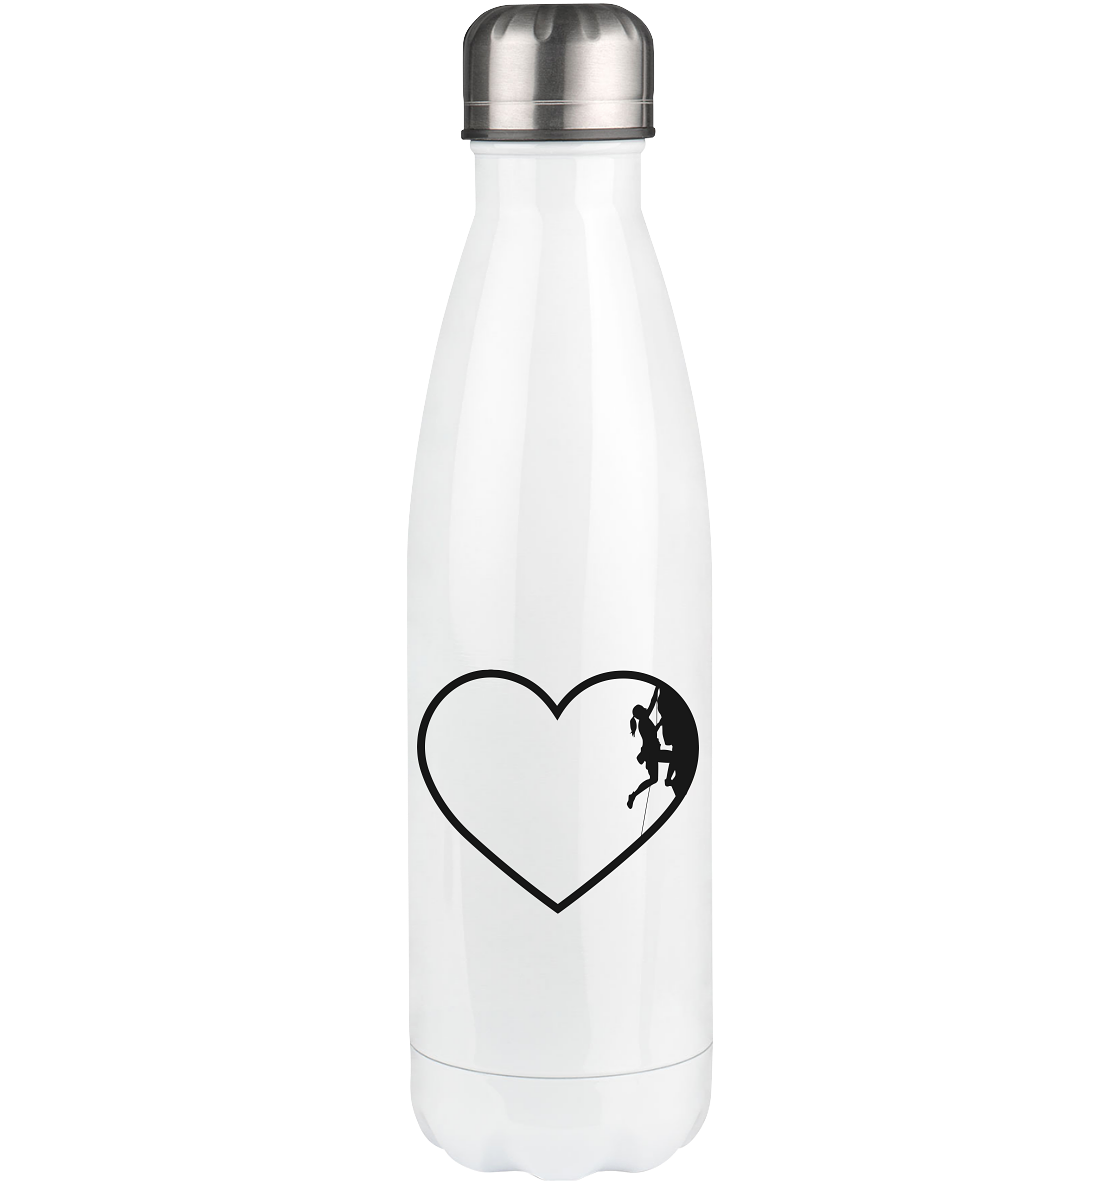 Heart 2 and Climbing - Edelstahl Thermosflasche klettern 500ml